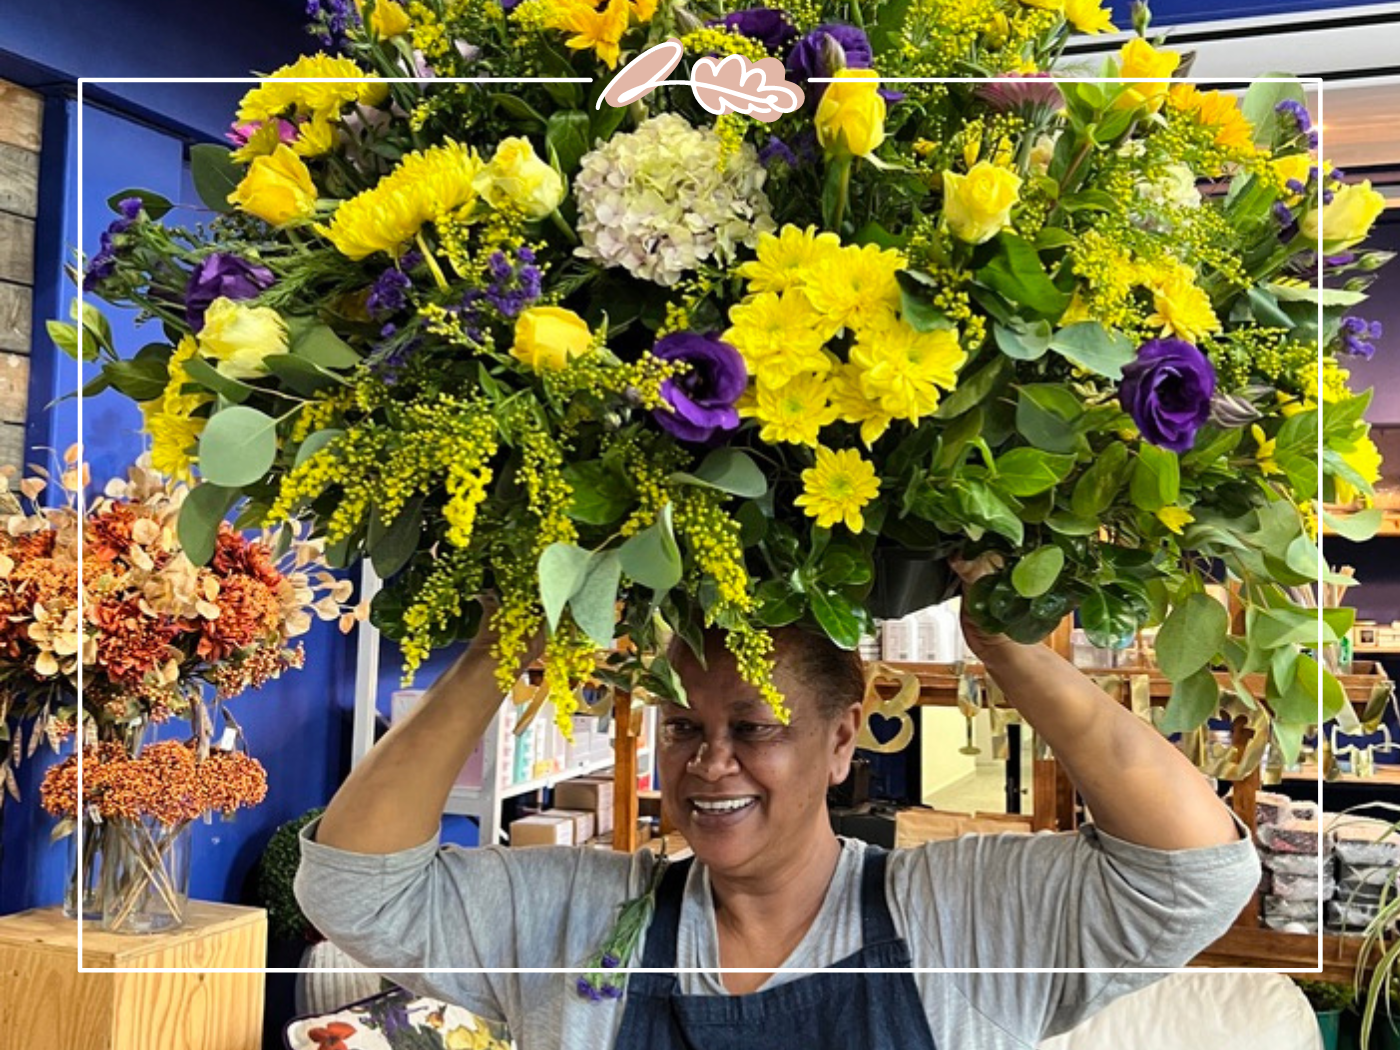 A florist balances a large, vibrant bouquet on her head in the store with pots for a function, capturing the joy and creativity in their work. Perfect for expressing love and care. Visit Fabulous Flowers and Gifts for more.